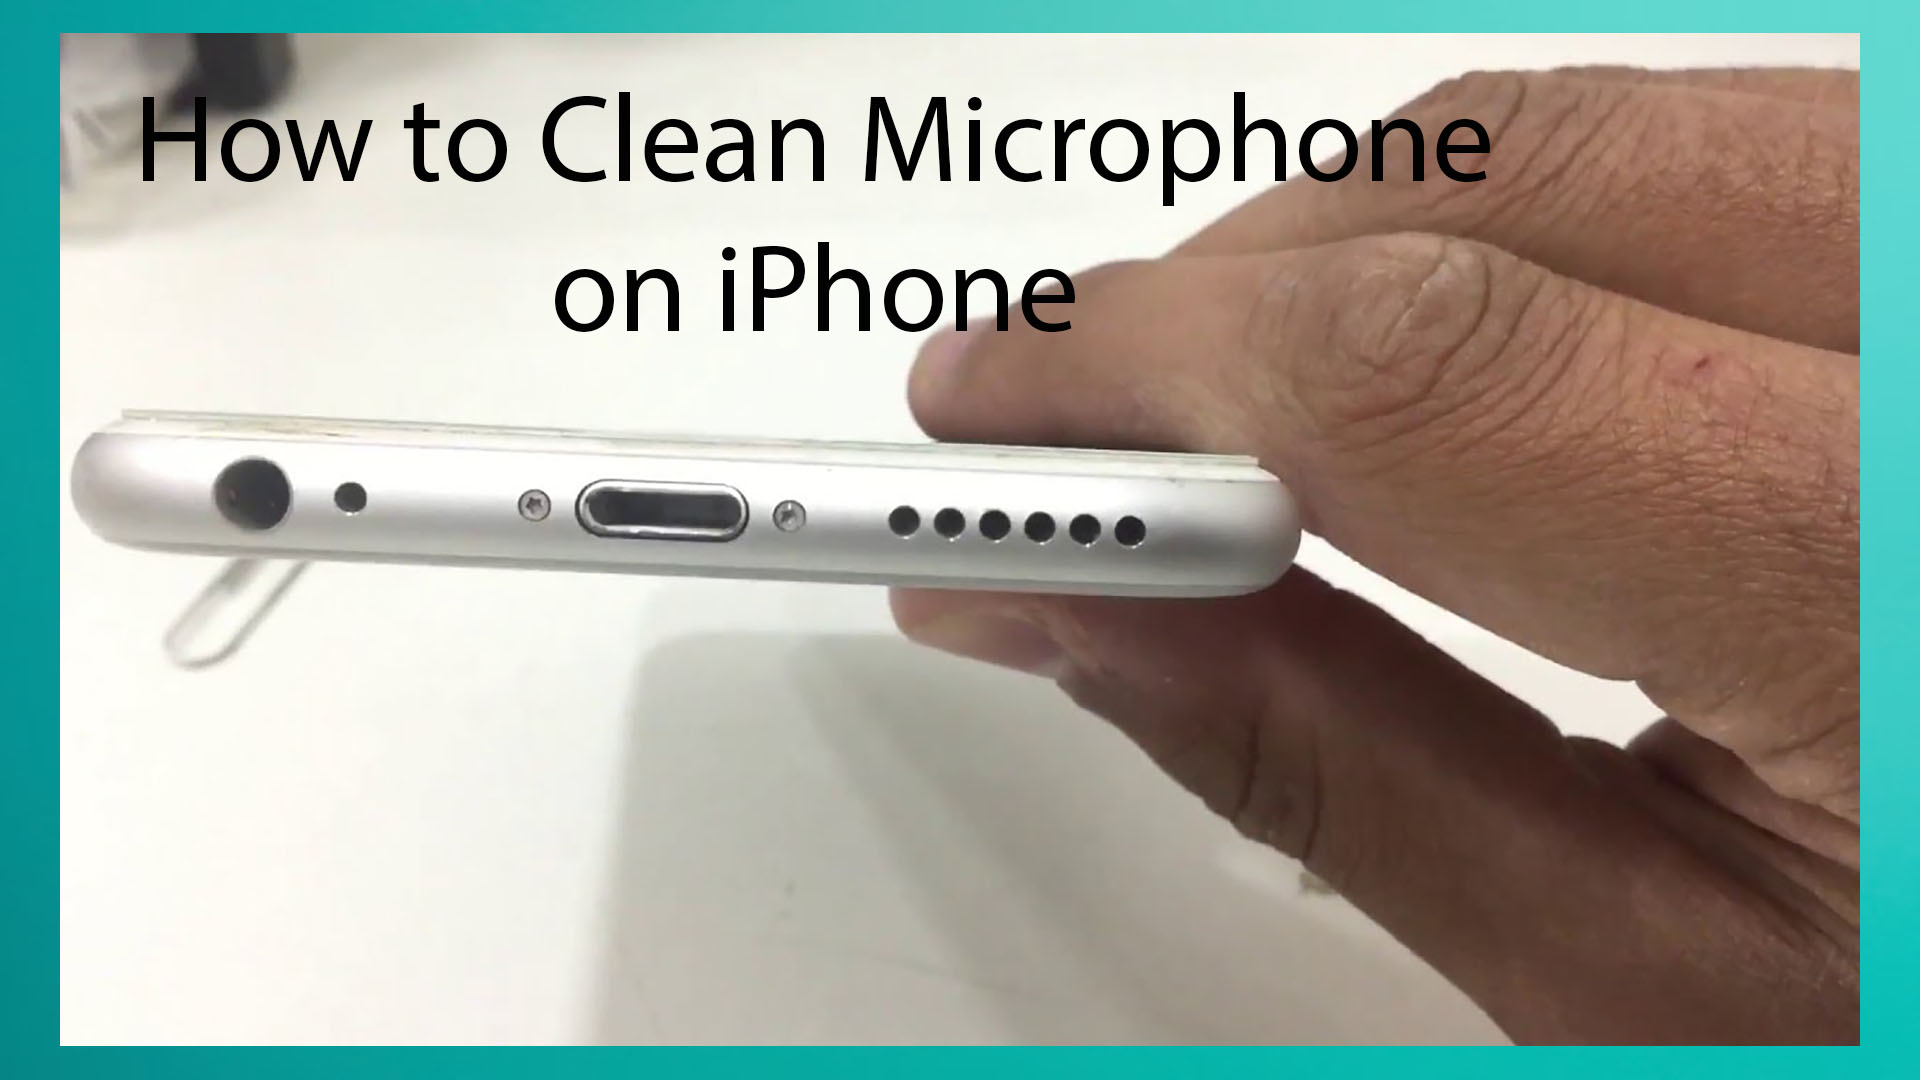 How to Clean Microphone on iPhone